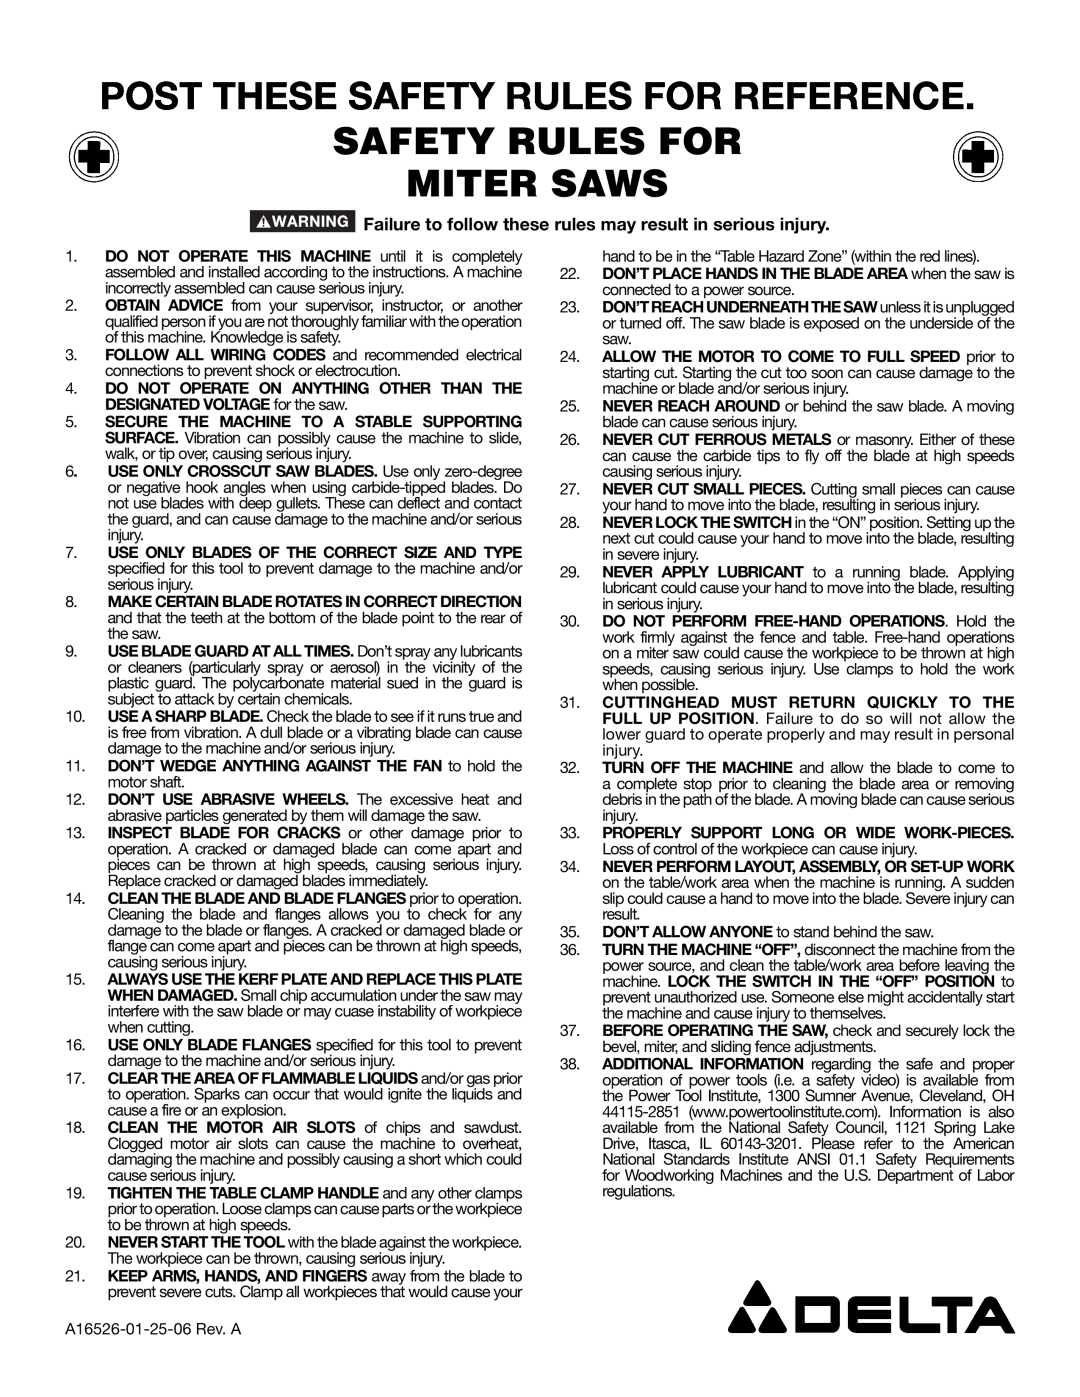 Delta manual Post These Safety Rules For Reference, Safety Rules For Miter Saws 